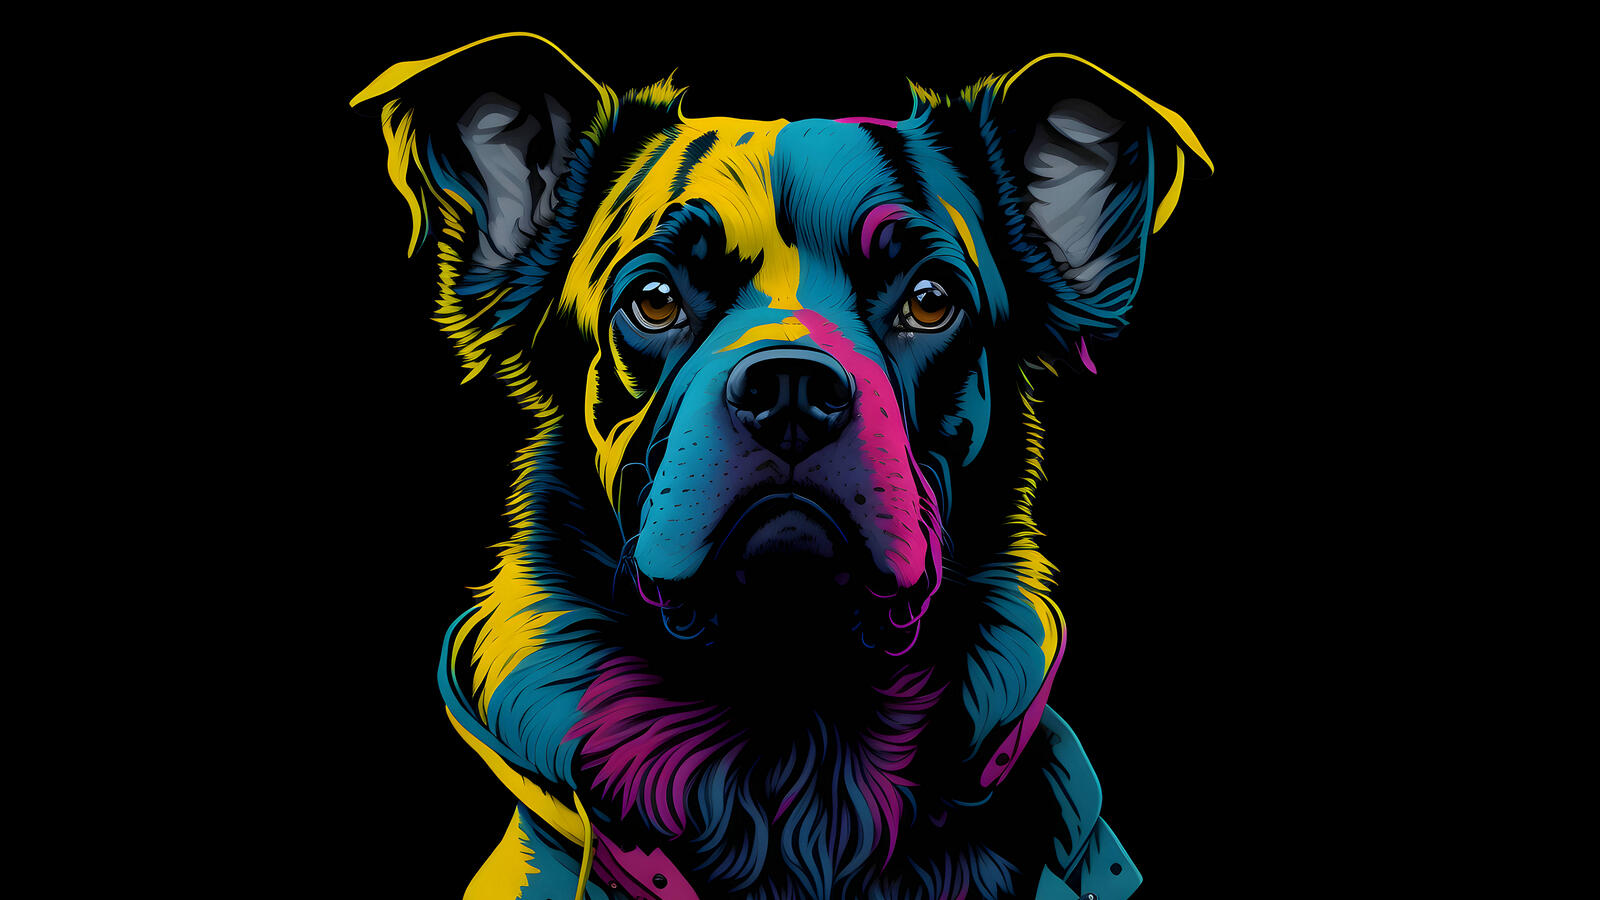 Free photo The dog is drawn with multicolored paints on a black background